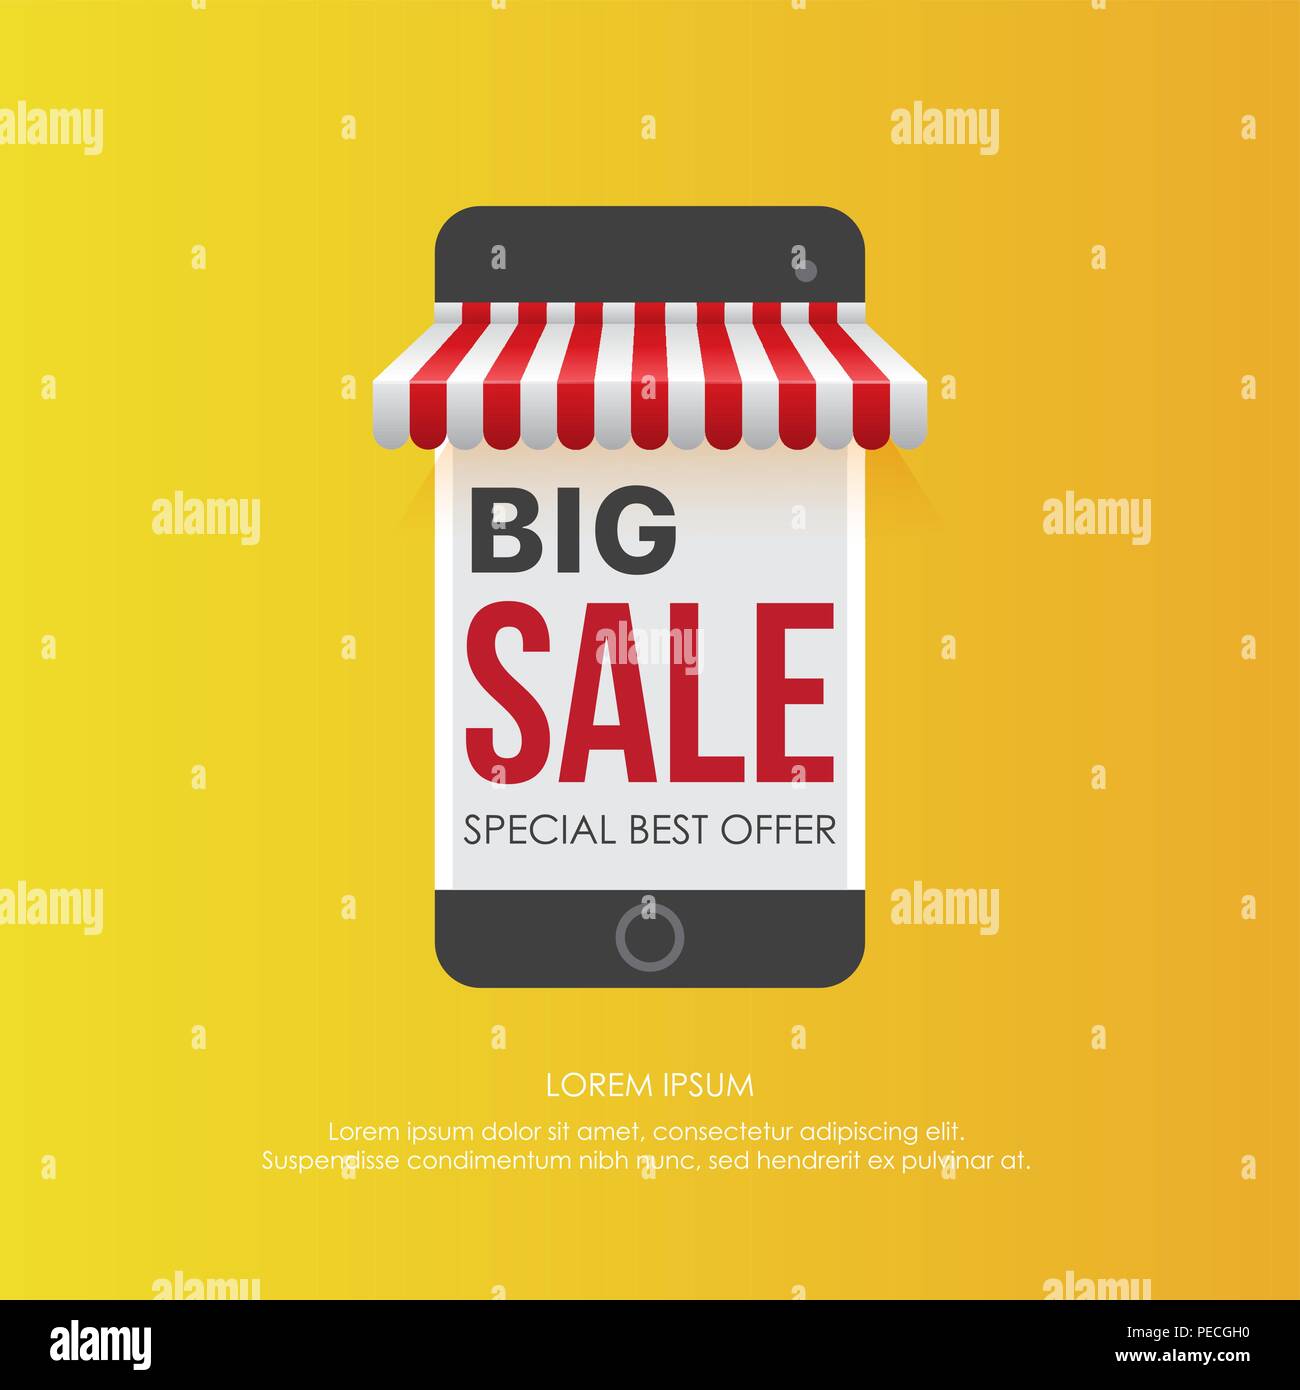 Colorful display of graphic smartphone showing big sale offer on vibrant yellow background Stock Vector